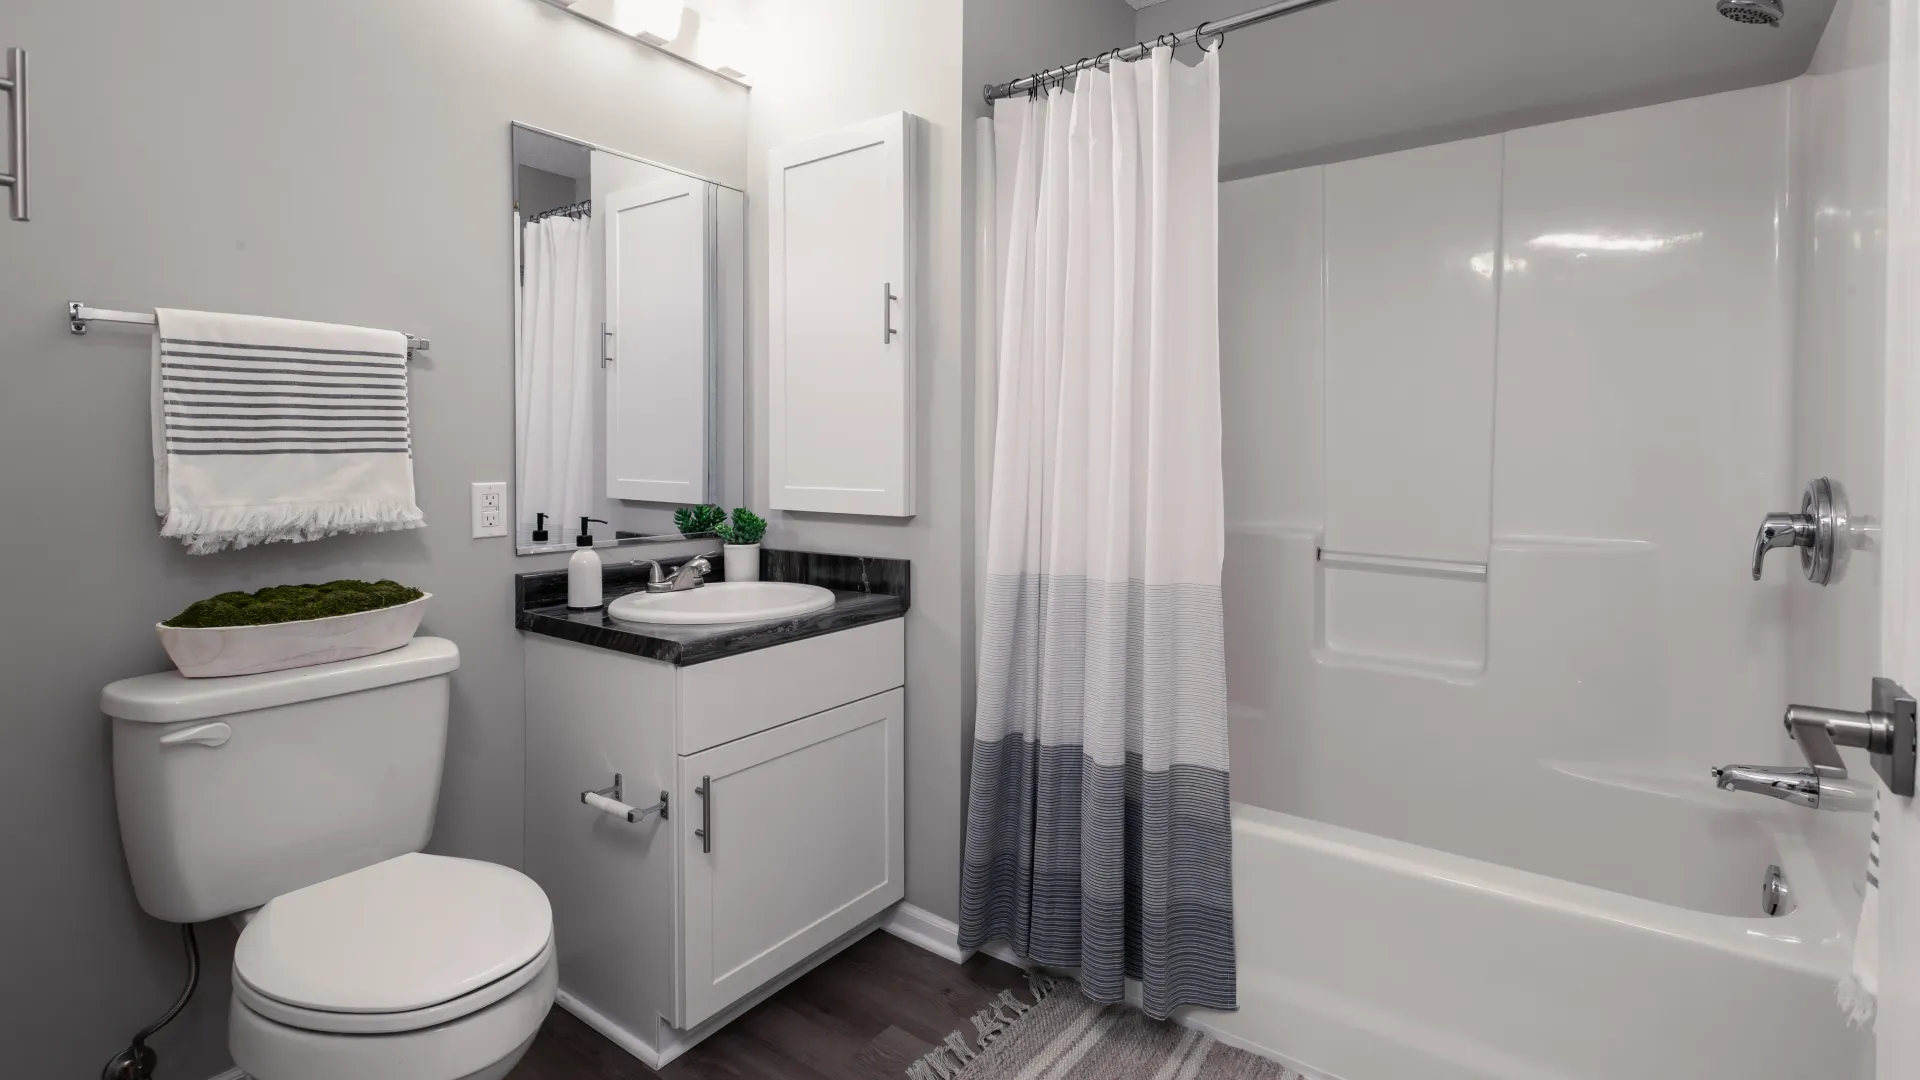 Modern bathroom with a white vanity, gray countertop, white toilet, striped towel, and a shower with a white curtain.